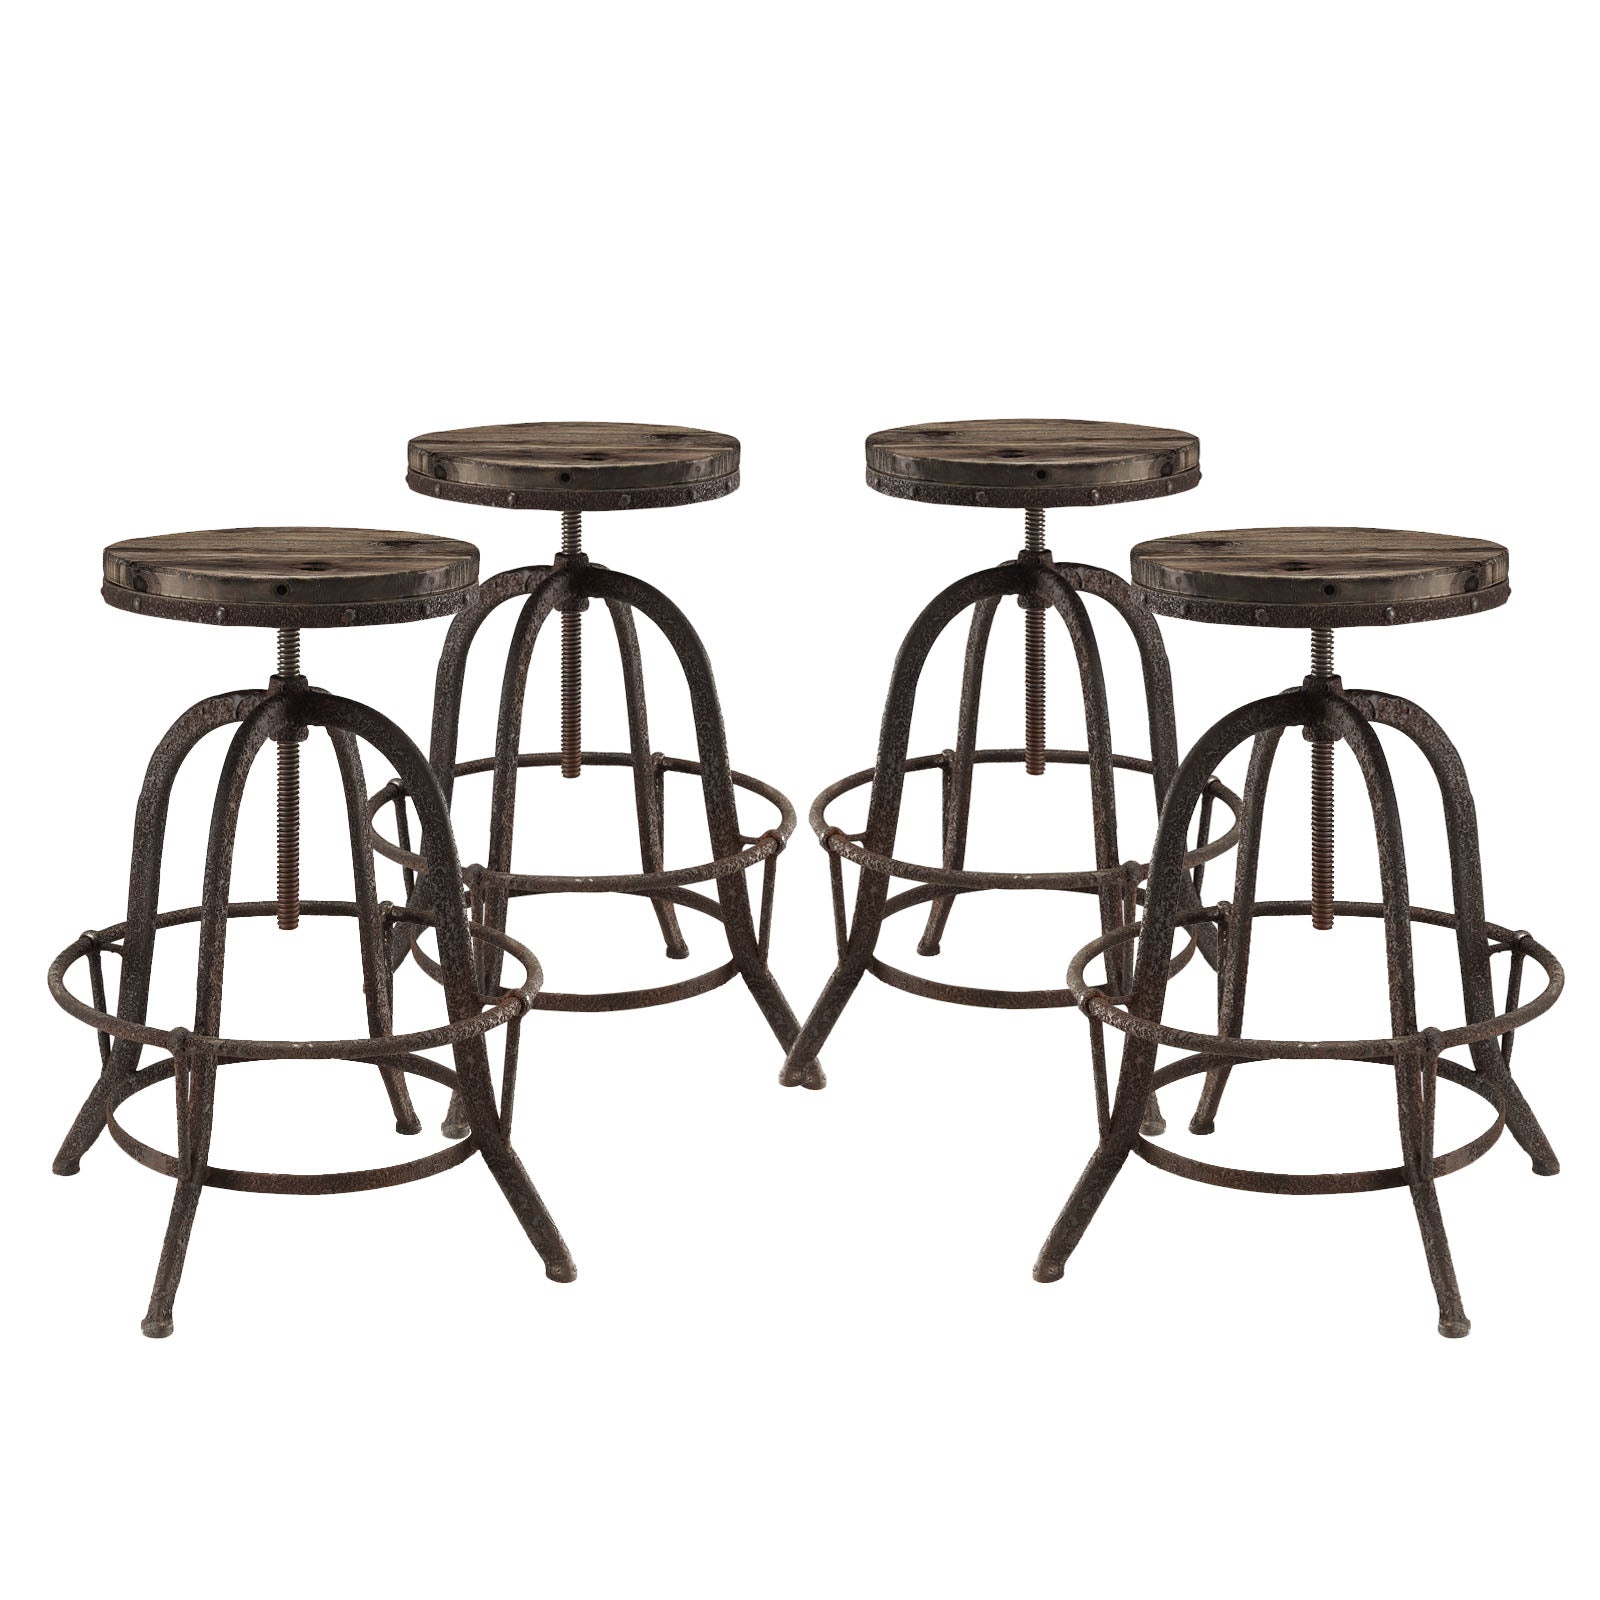 Collect Bar Stool Set of 4 - East Shore Modern Home Furnishings